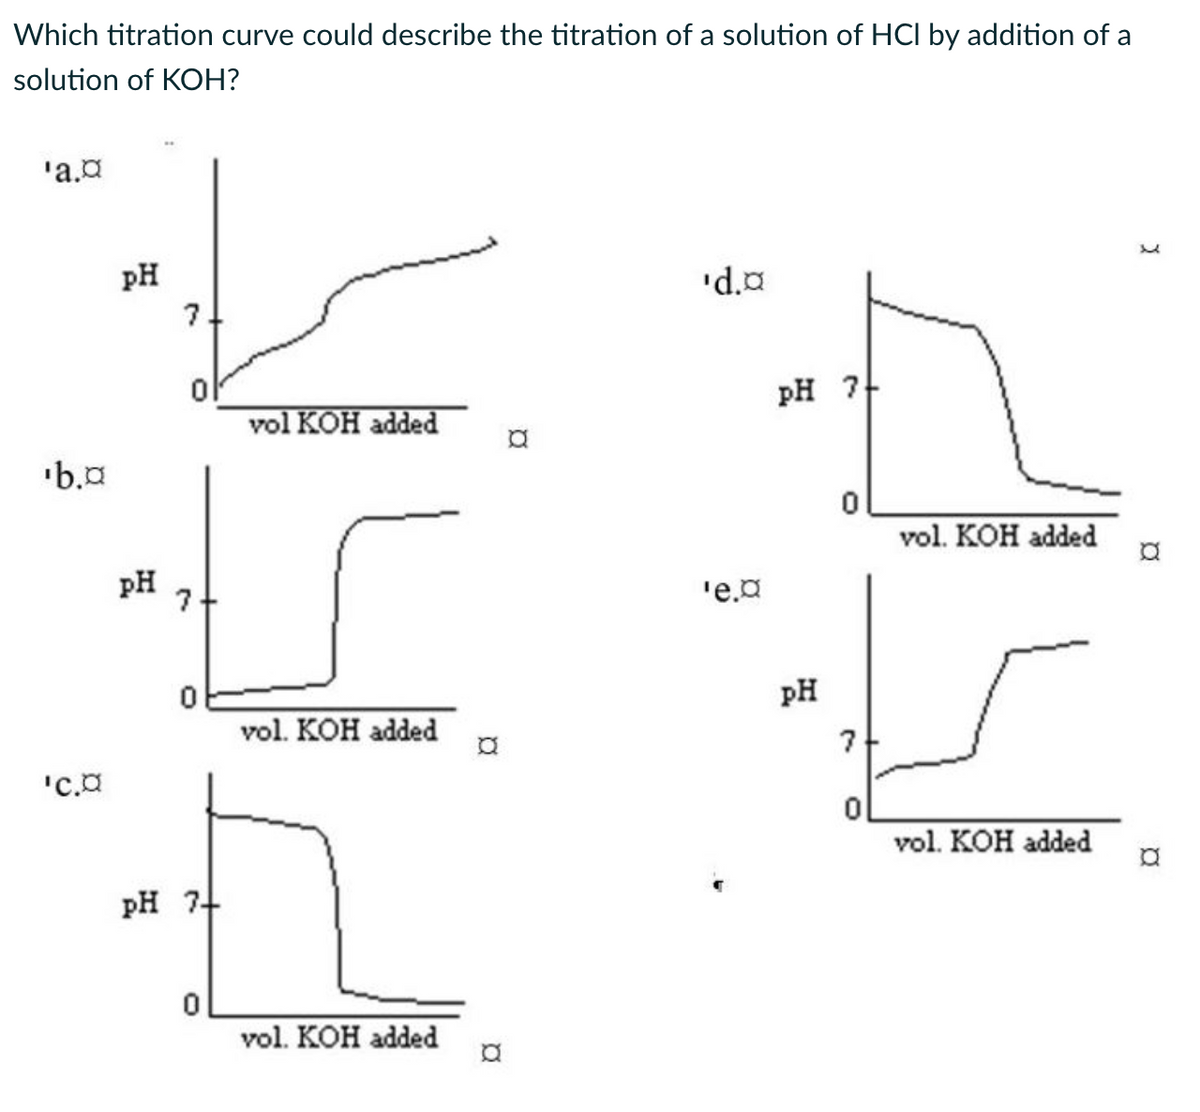 Which titration curve could describe the titration of a solution of HCI by addition of a
solution of KOH?
'a.¤
pH
7
'b.x
vol KOH added
'C.¤
pH
7
0
vol. KOH added
a
pH 7
0
vol. KOH added
a
'd.¤
'e.¤
pH 7
X
0
vol. KOH added
a
pH
7
0
vol. KOH added
a